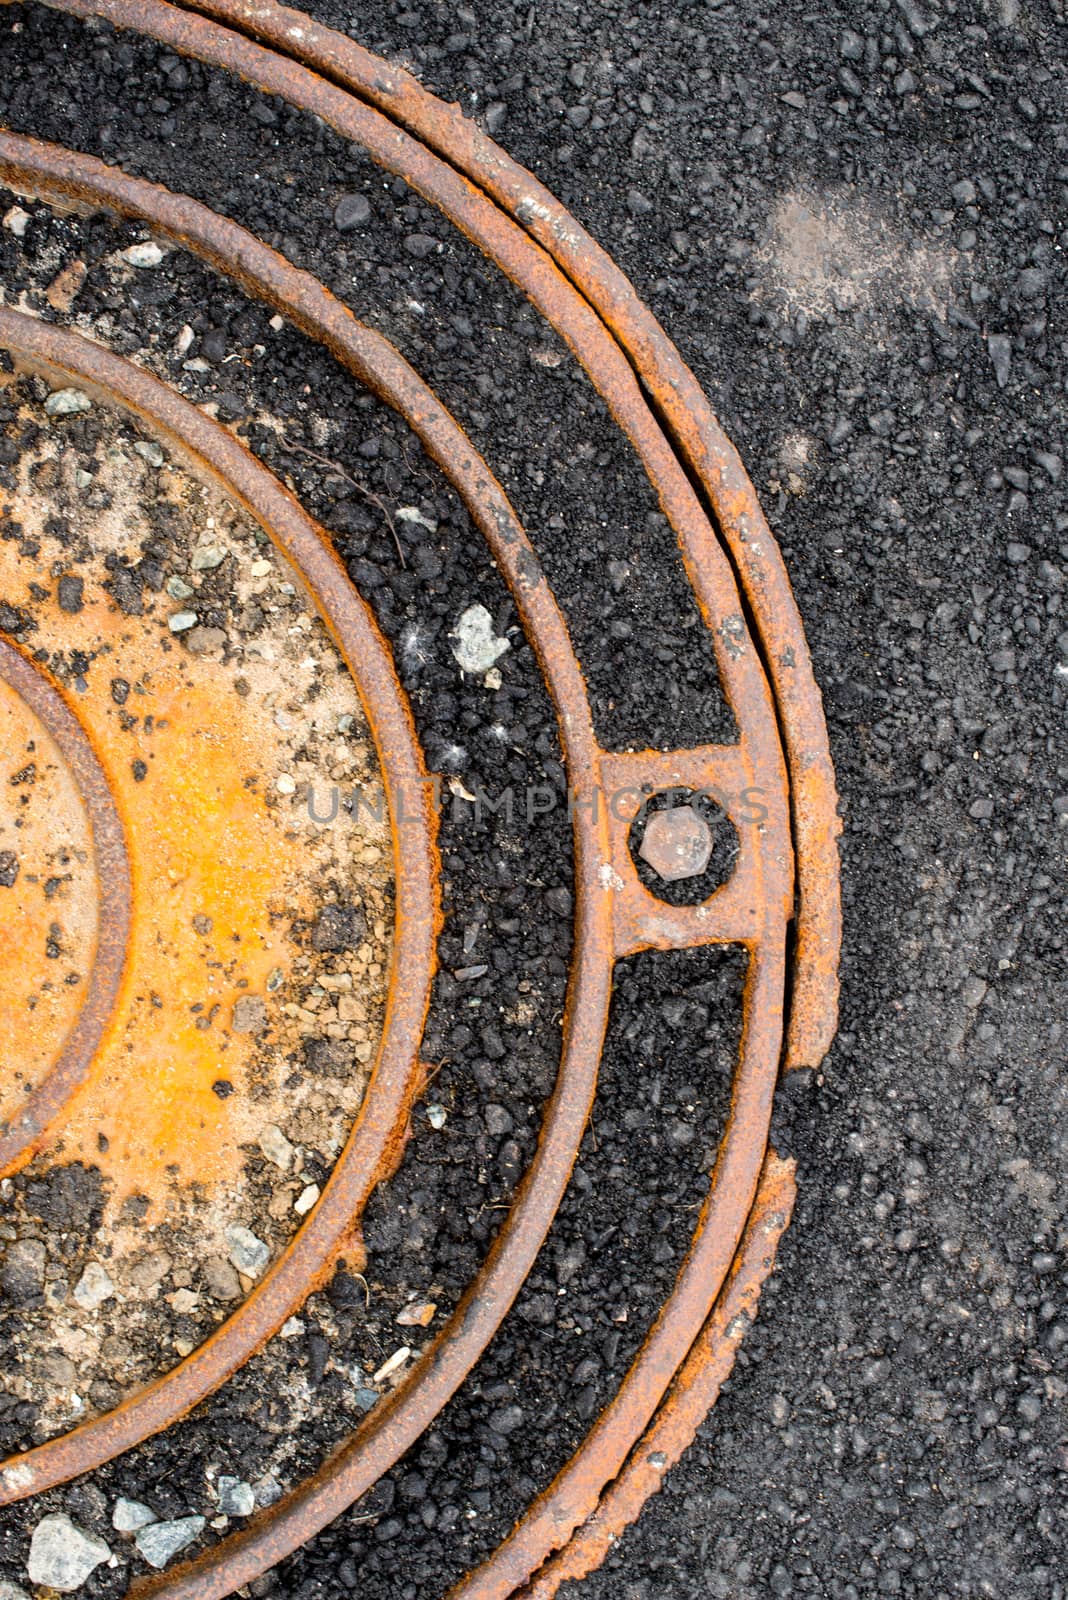 Rusty metal manhole cover by rootstocks